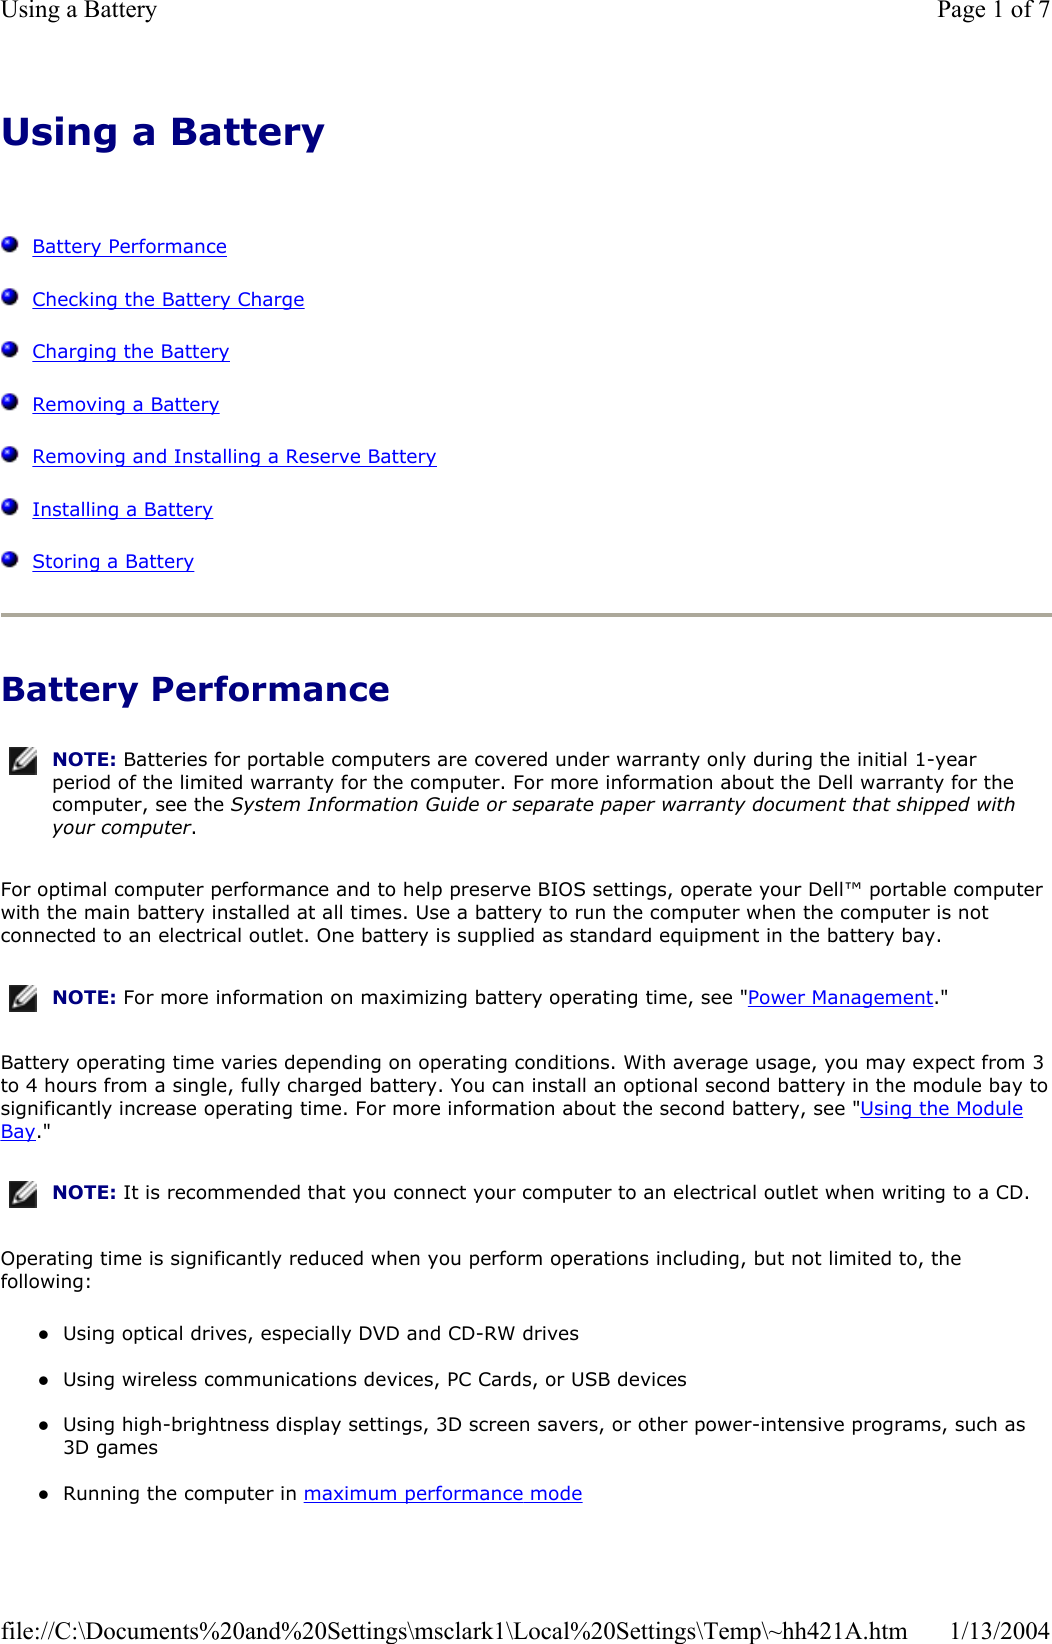 Using a BatteryBattery PerformanceChecking the Battery ChargeCharging the BatteryRemoving a BatteryRemoving and Installing a Reserve BatteryInstalling a BatteryStoring a BatteryBattery Performance For optimal computer performance and to help preserve BIOS settings, operate your Dell™ portable computer with the main battery installed at all times. Use a battery to run the computer when the computer is not connected to an electrical outlet. One battery is supplied as standard equipment in the battery bay. Battery operating time varies depending on operating conditions. With average usage, you may expect from 3 to 4 hours from a single, fully charged battery. You can install an optional second battery in the module bay tosignificantly increase operating time. For more information about the second battery, see &quot;Using the Module Bay.&quot;Operating time is significantly reduced when you perform operations including, but not limited to, the following: zUsing optical drives, especially DVD and CD-RW drives zUsing wireless communications devices, PC Cards, or USB devices zUsing high-brightness display settings, 3D screen savers, or other power-intensive programs, such as 3D games zRunning the computer in maximum performance modeNOTE: Batteries for portable computers are covered under warranty only during the initial 1-year period of the limited warranty for the computer. For more information about the Dell warranty for the computer, see the System Information Guide or separate paper warranty document that shipped with your computer.NOTE: For more information on maximizing battery operating time, see &quot;Power Management.&quot;NOTE: It is recommended that you connect your computer to an electrical outlet when writing to a CD.Page 1 of 7Using a Battery1/13/2004file://C:\Documents%20and%20Settings\msclark1\Local%20Settings\Temp\~hh421A.htm